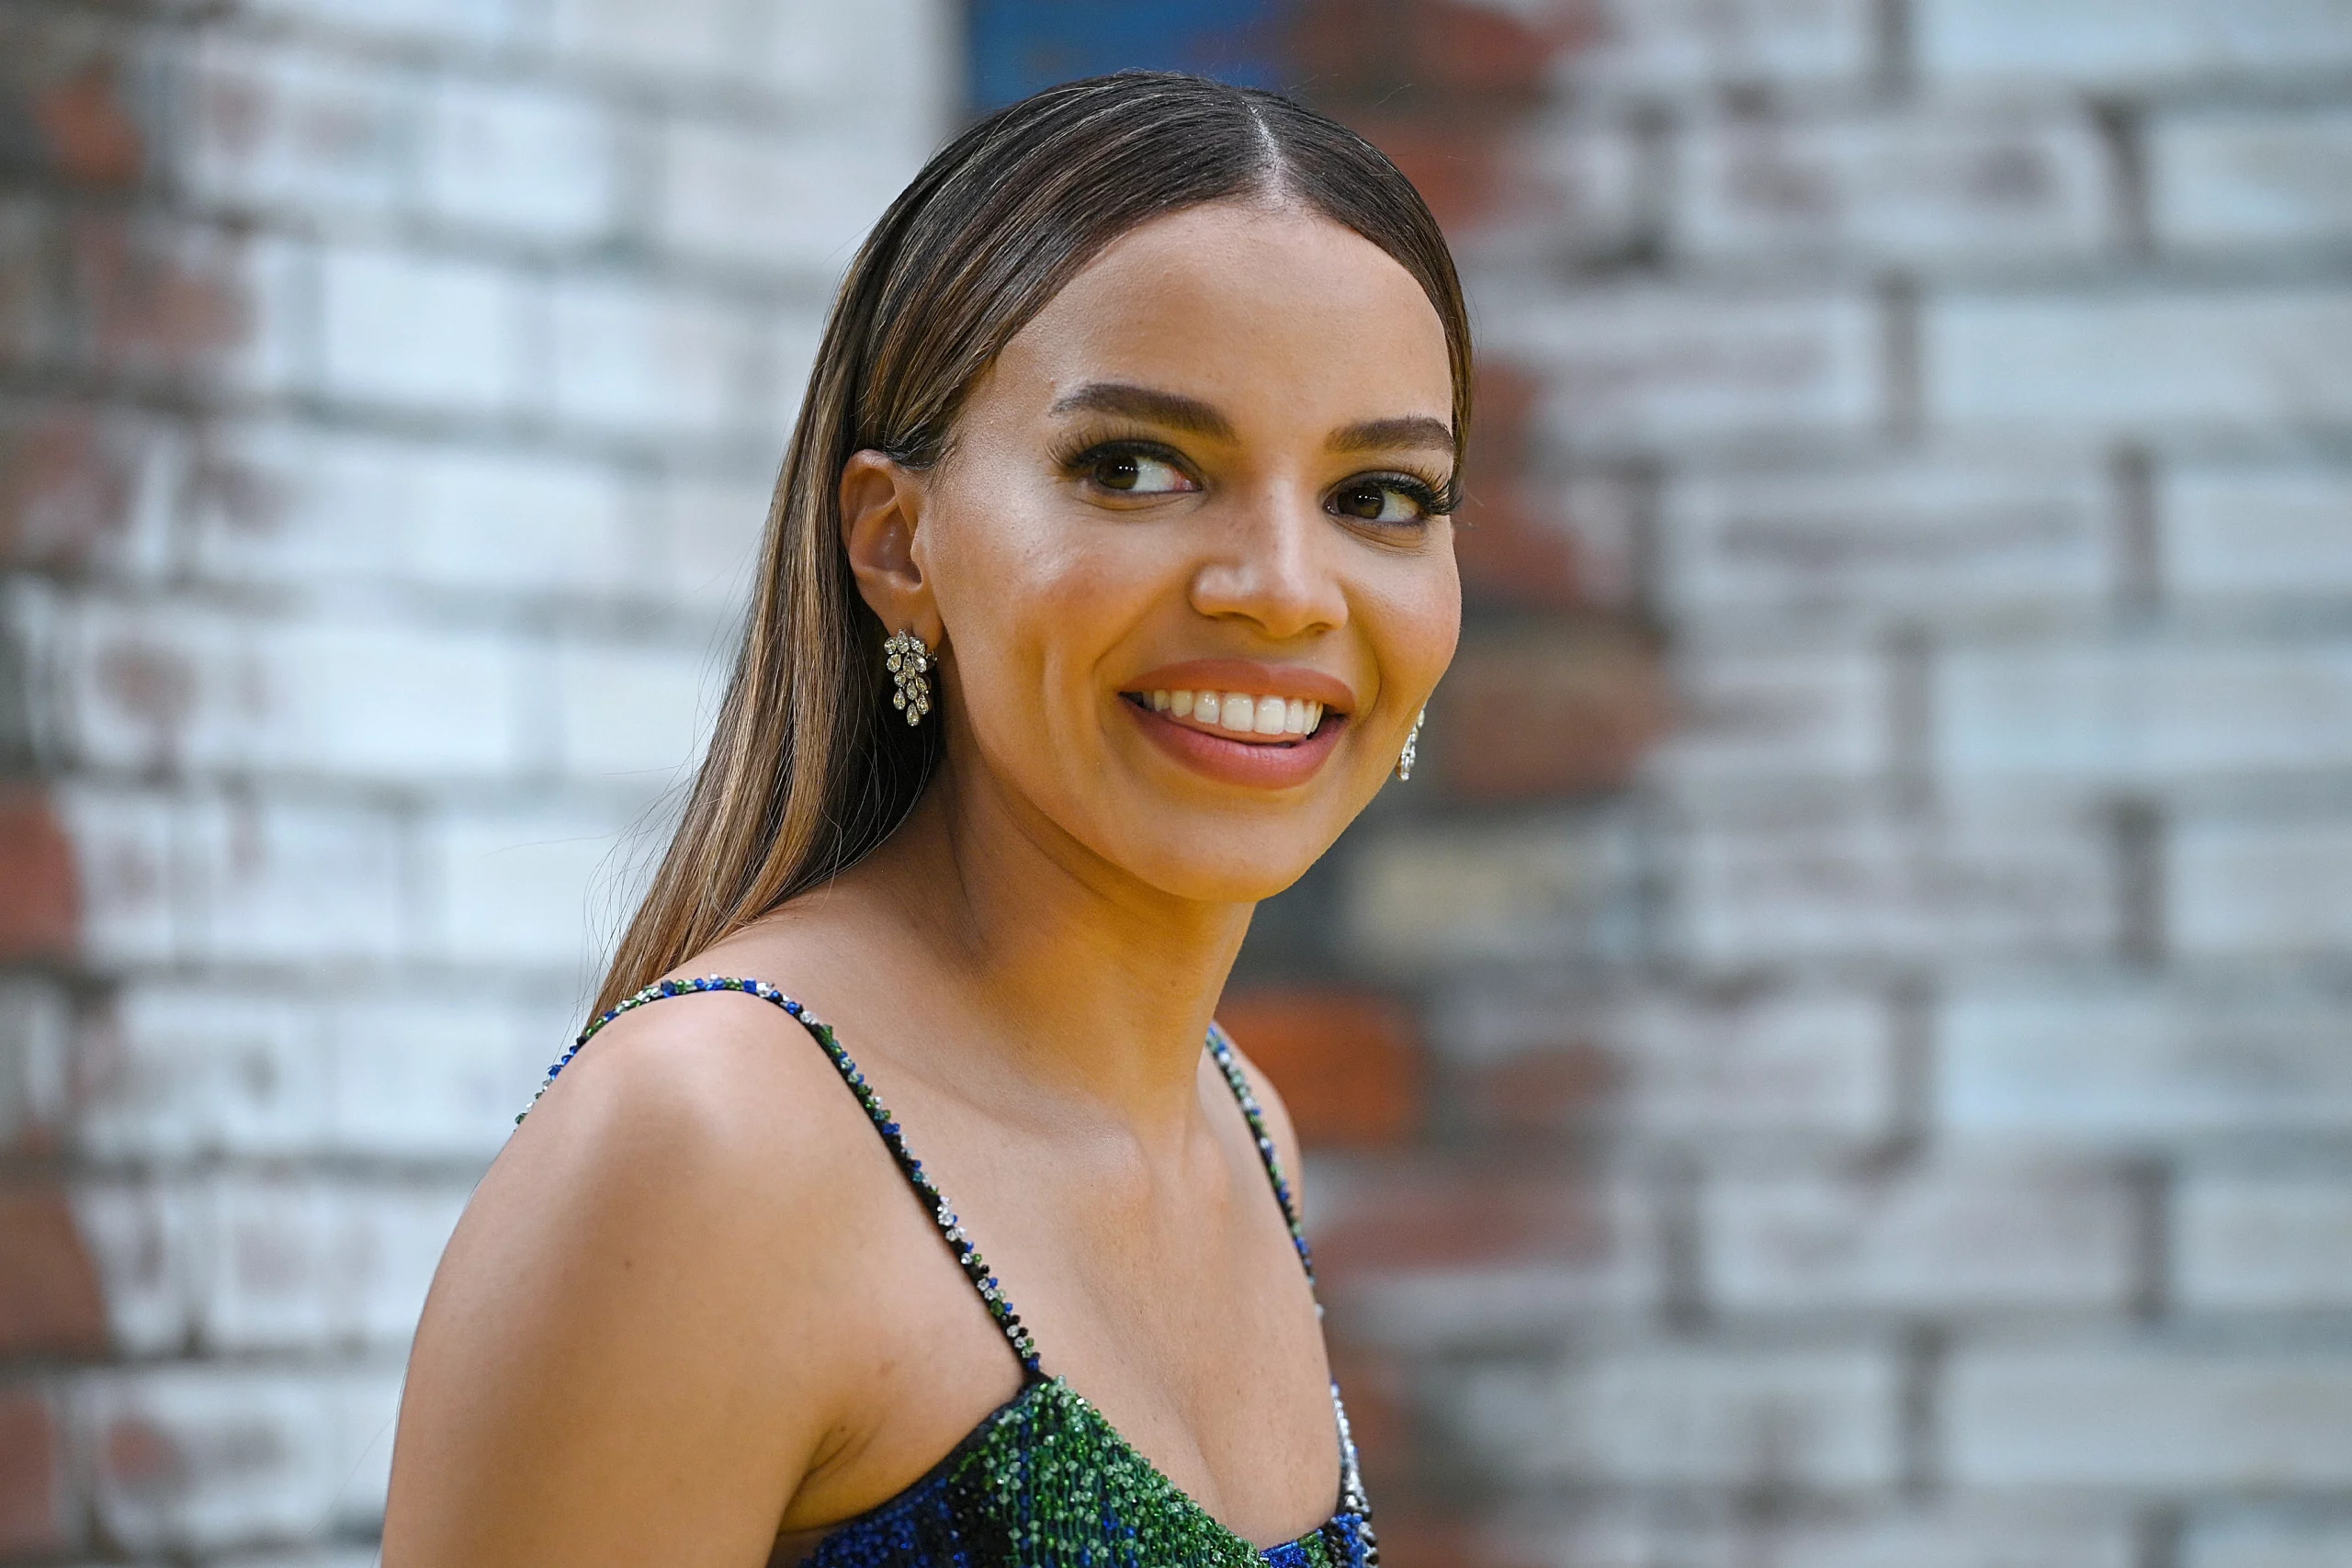 Leslie Grace was the Batgirl before its cancellation.